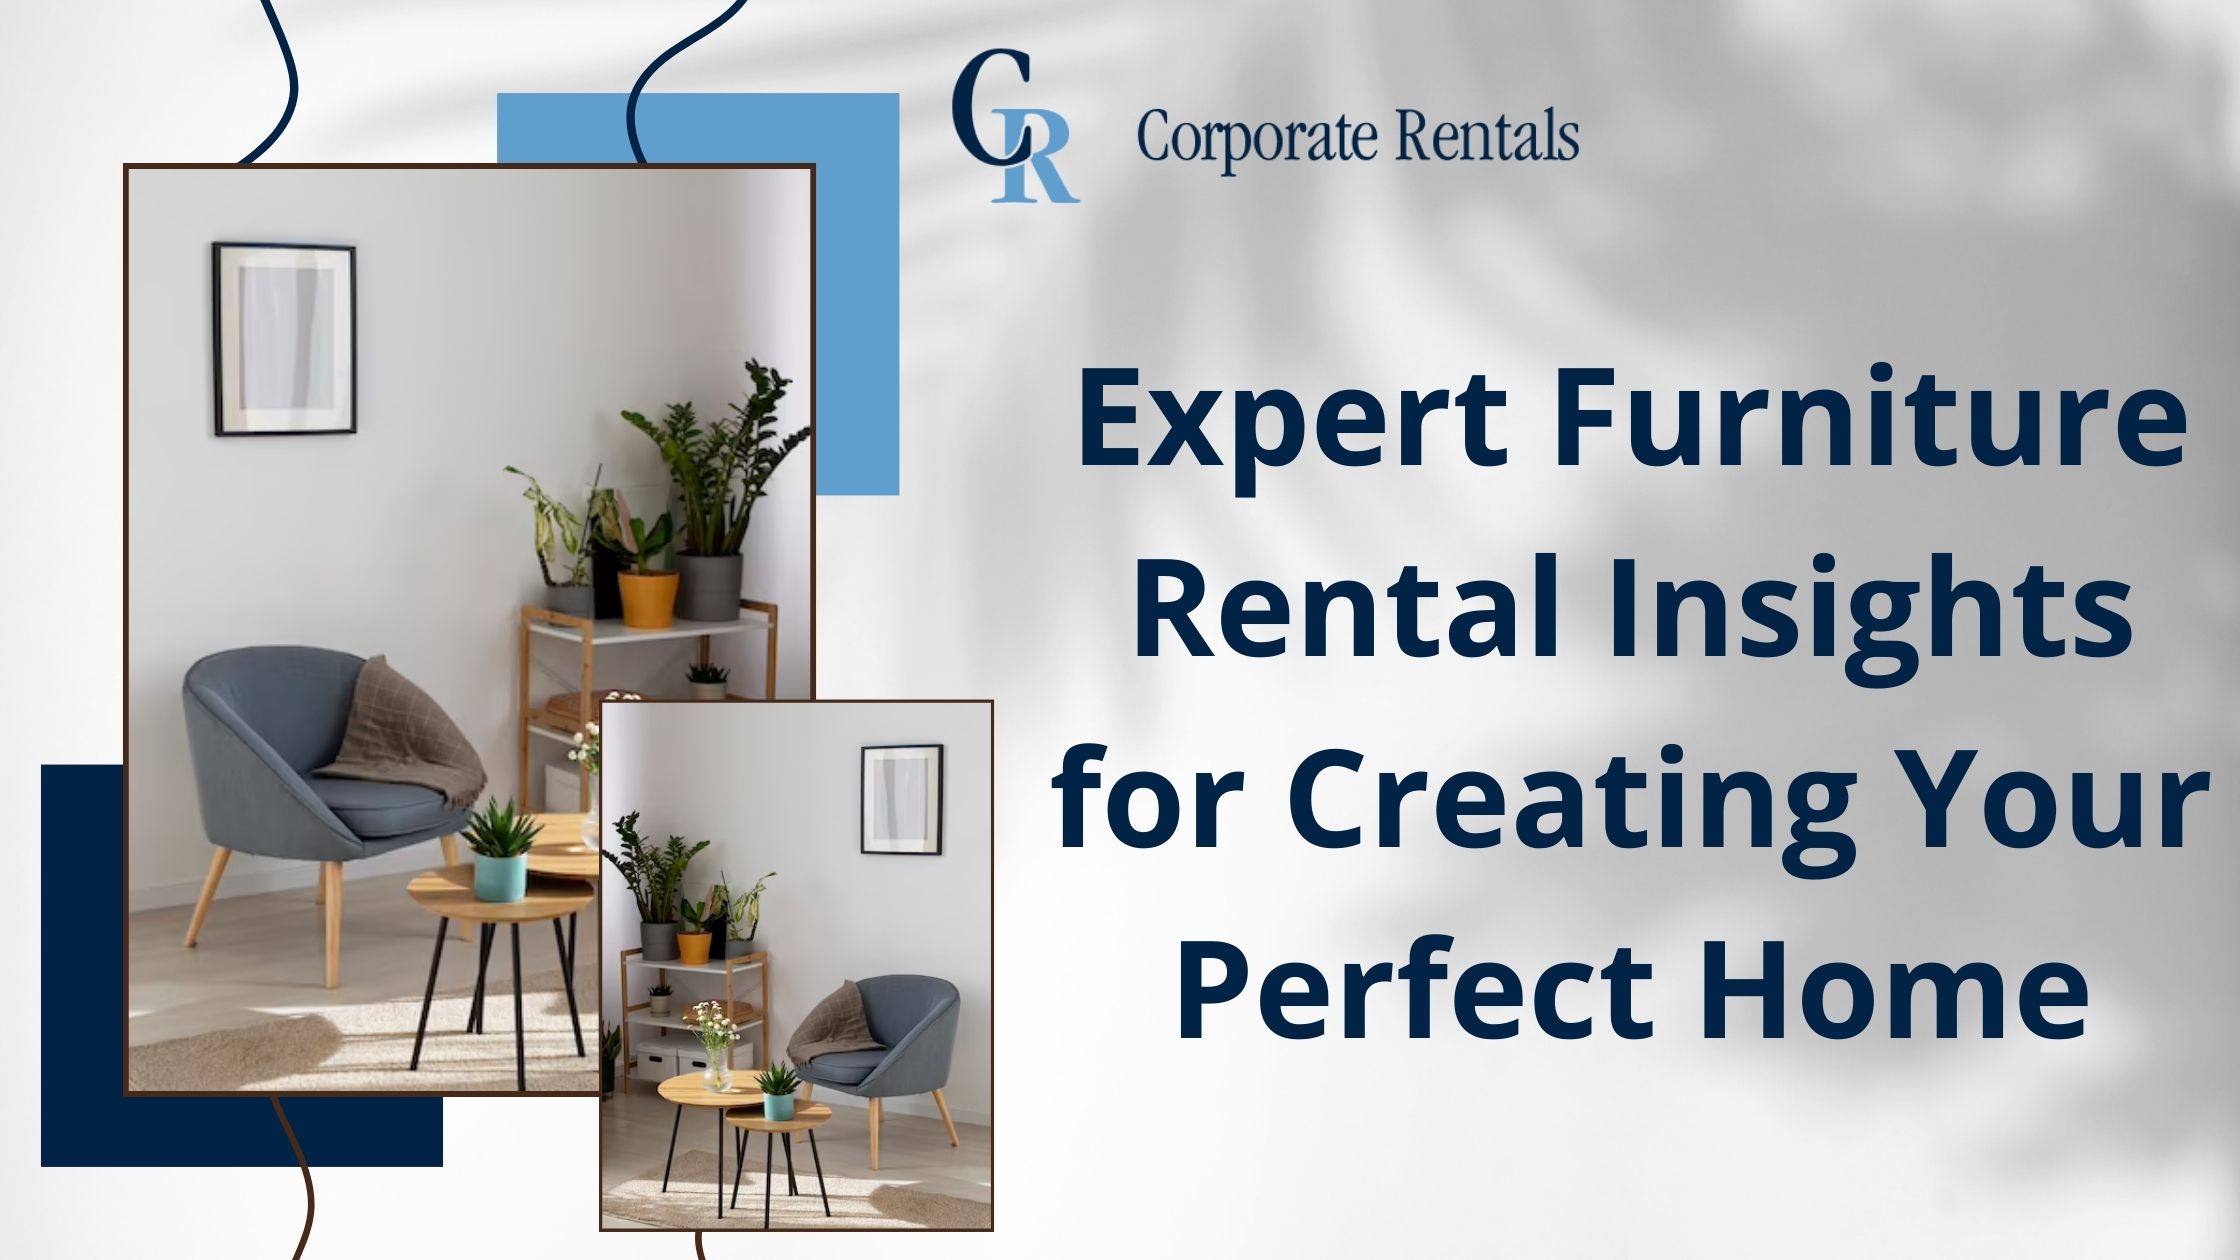 Expert Furniture Rental Insights for Creating Your Perfect Home